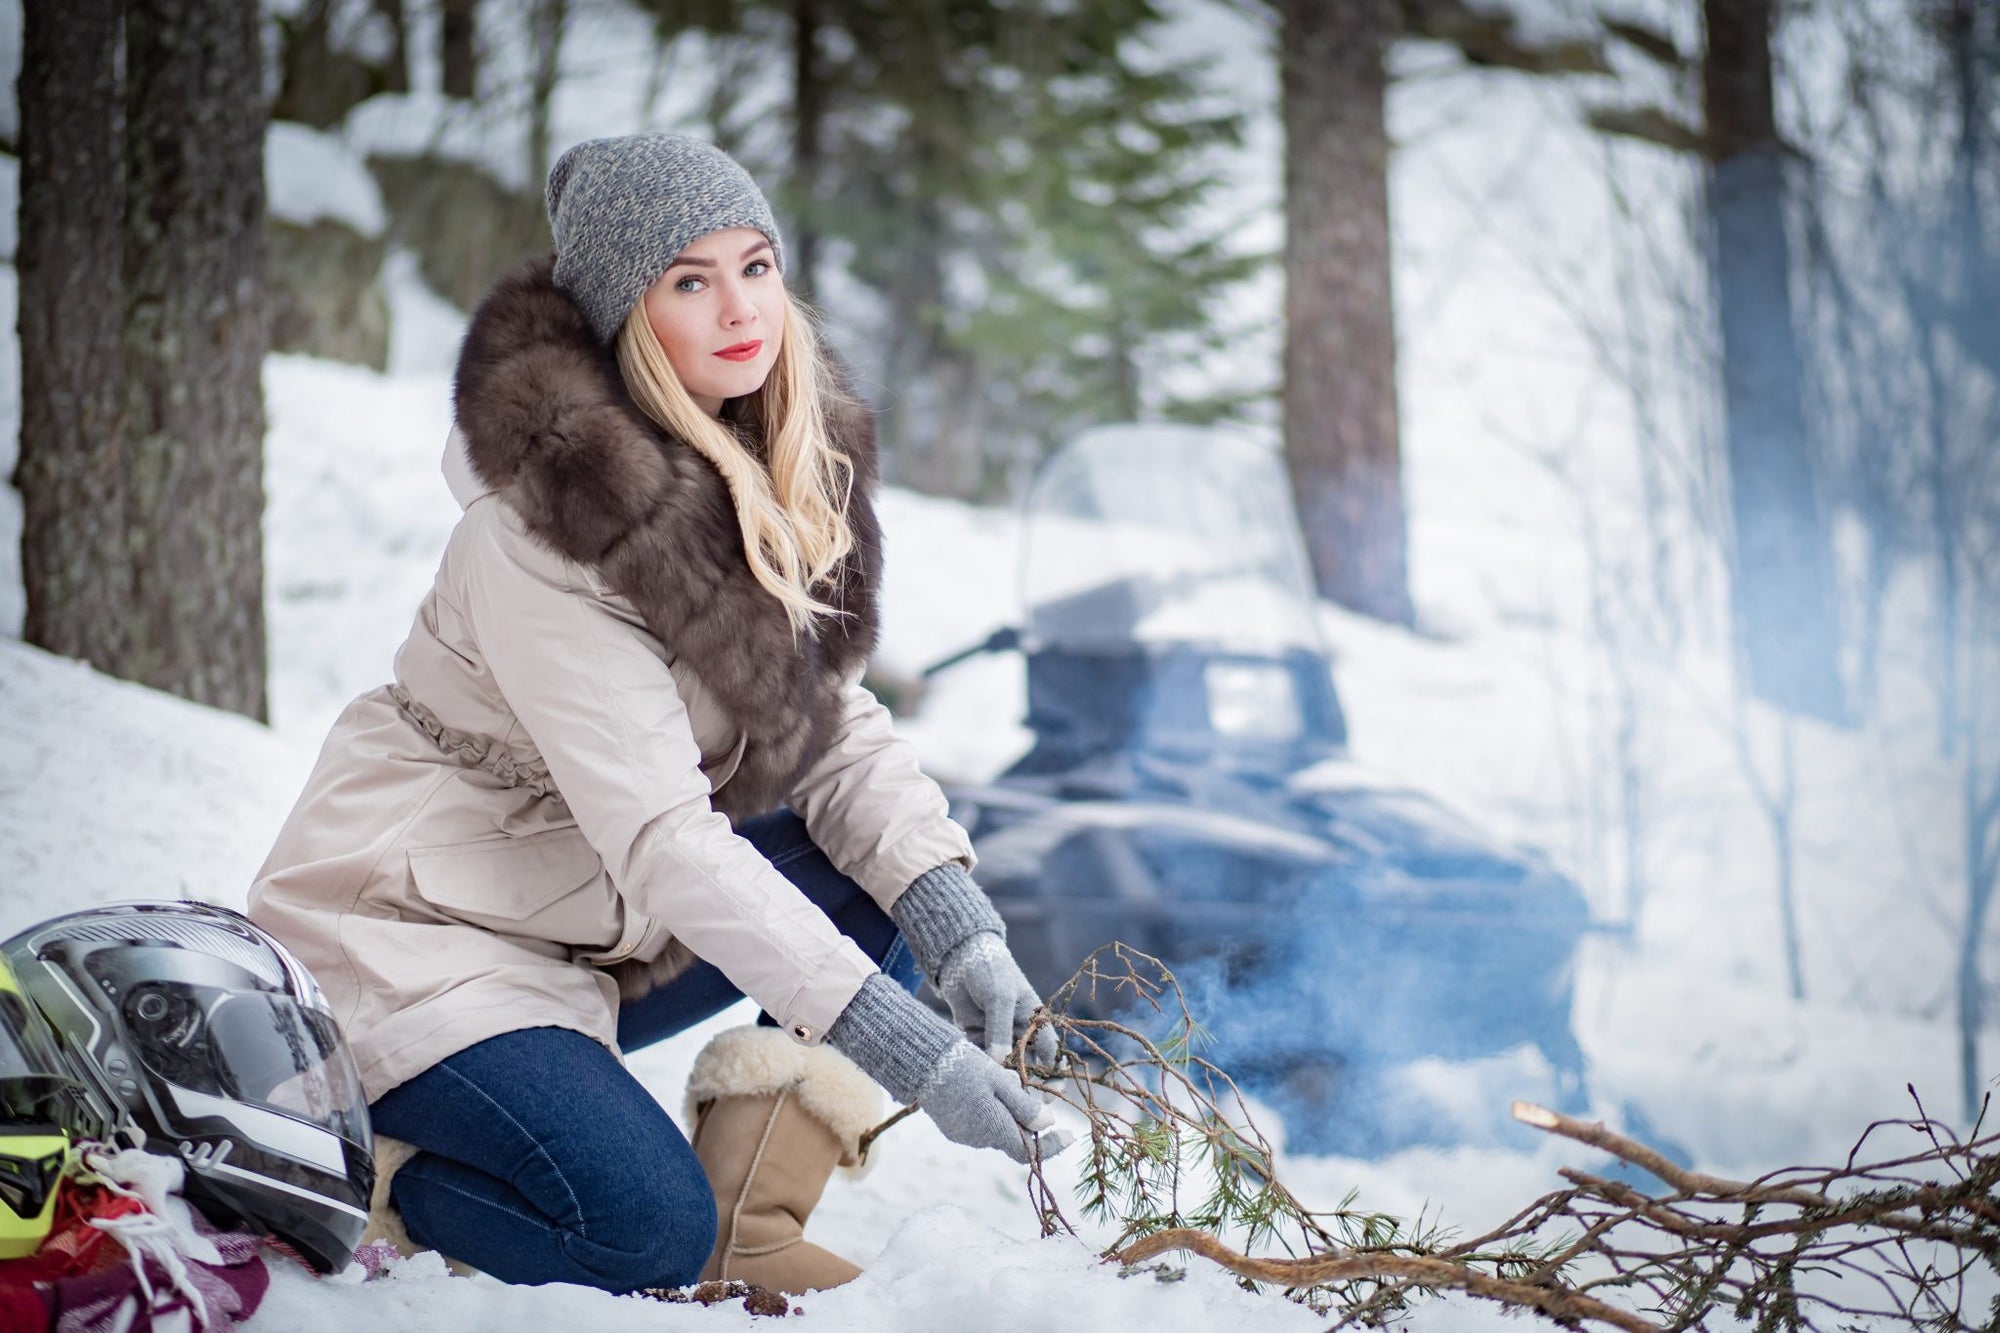 What You Need for Snowmobiling? How Do You Keep Snowmobile Warm?